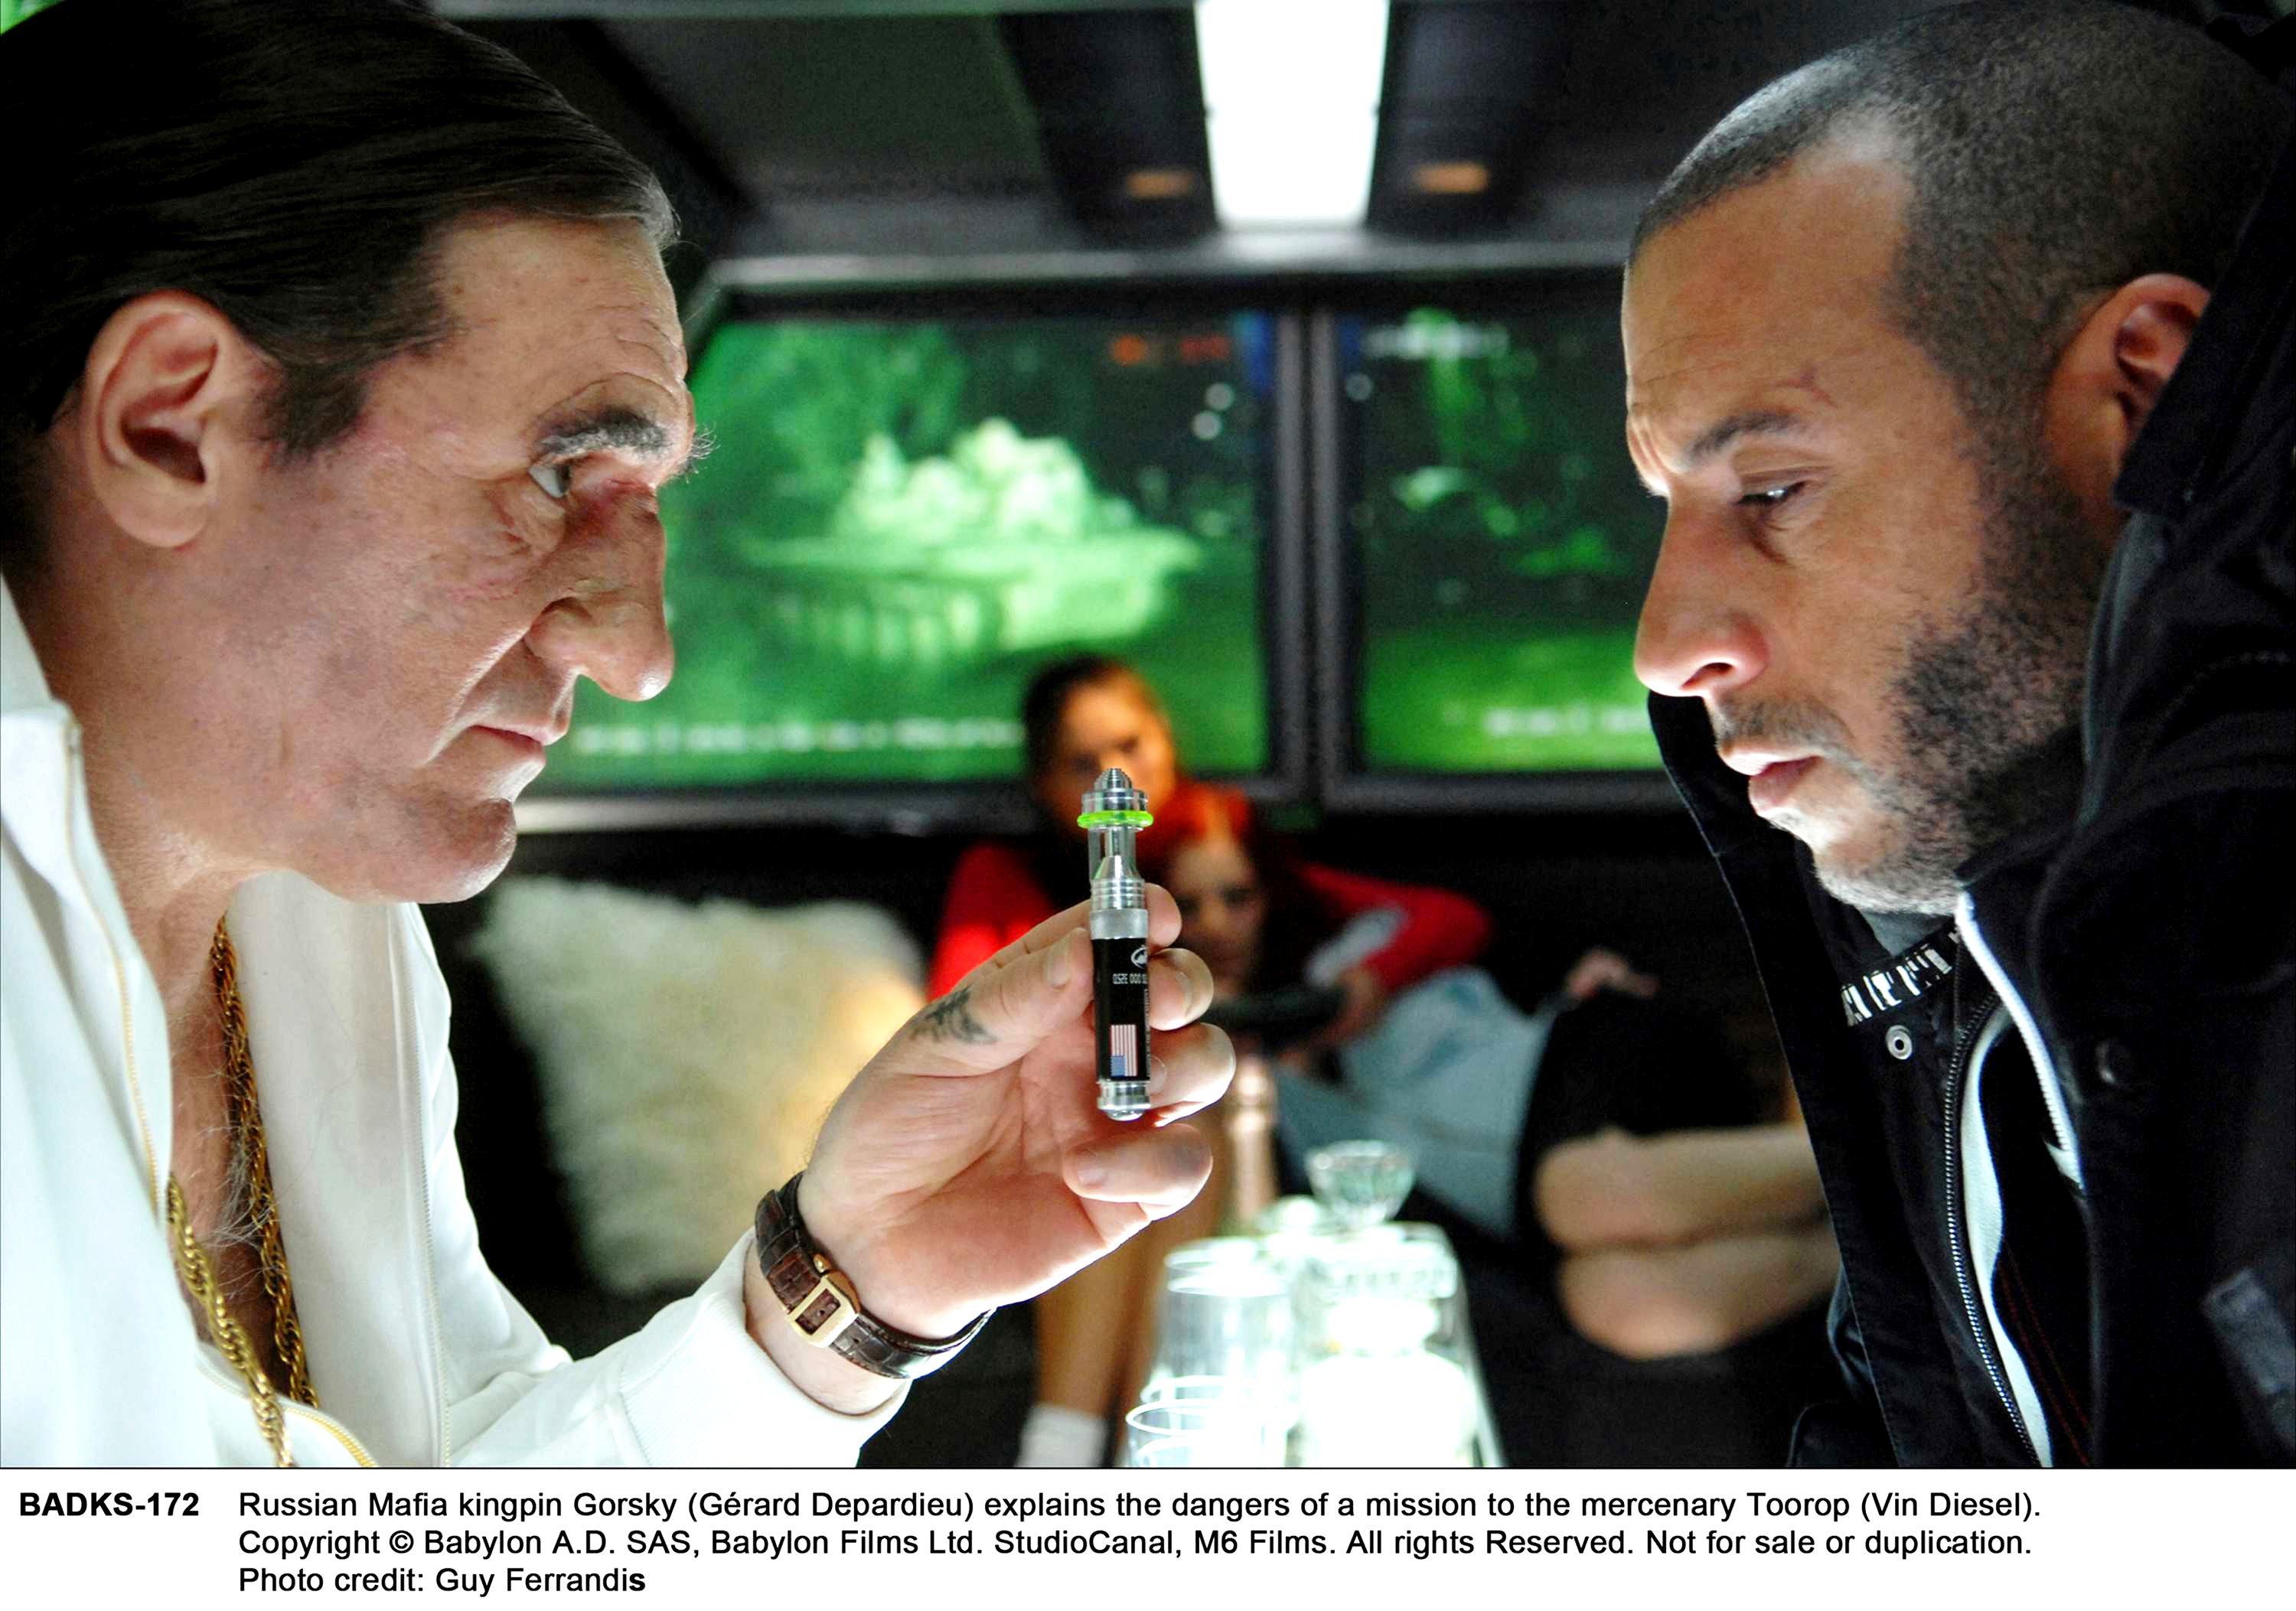 Gerard Depardieu stars as Gorsky and Vin Diesel stars as Toorop in The 20th Century Fox's Babylon A.D. (2008). Photo credit by Guy Ferrandis.